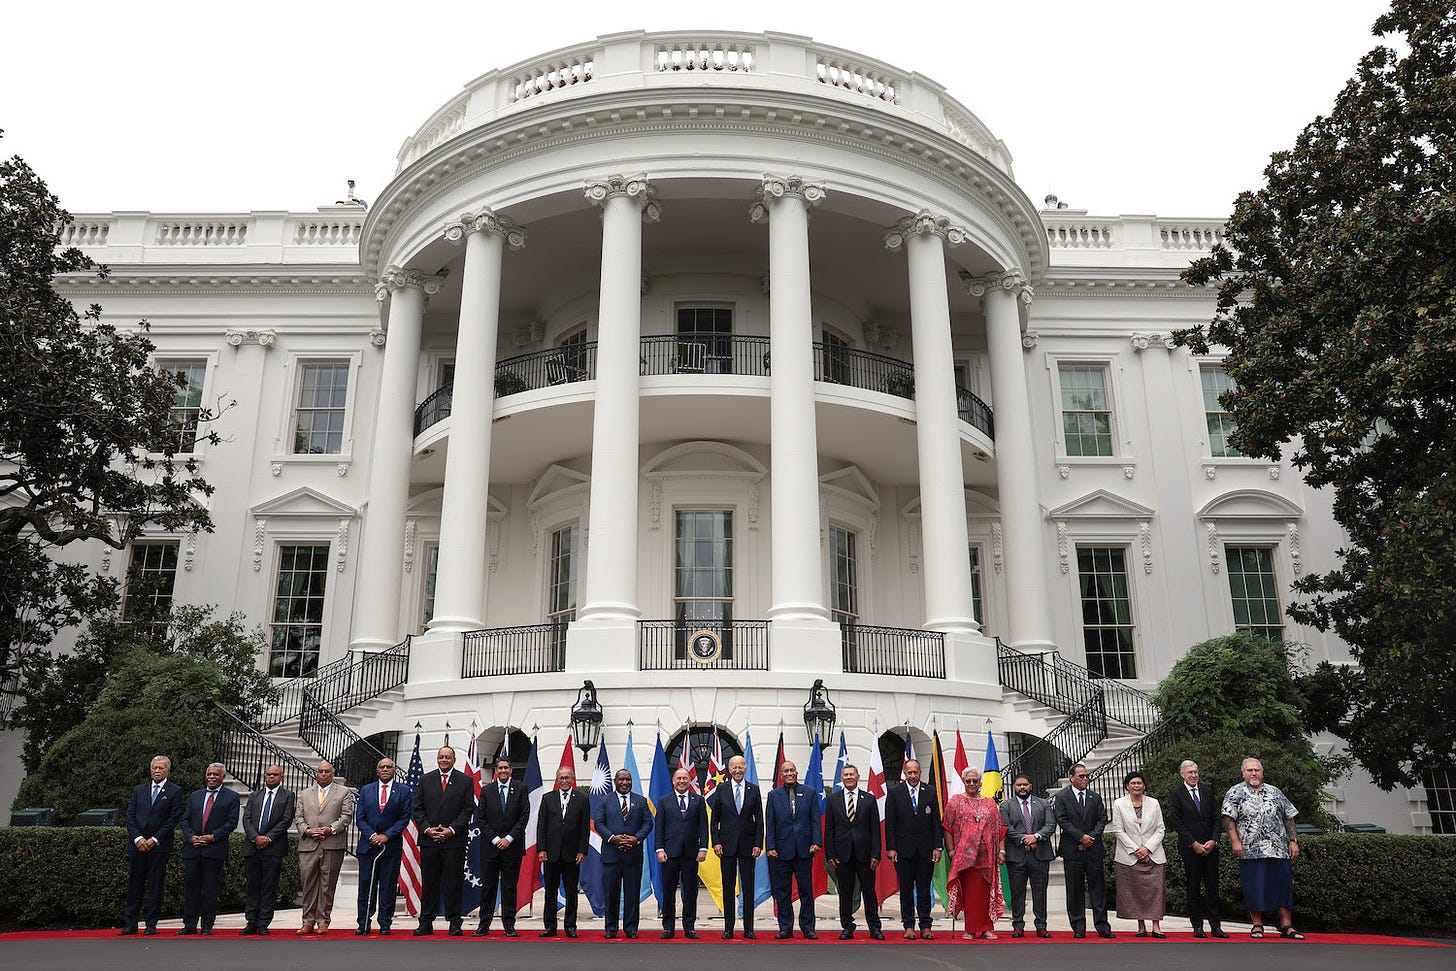 U.S. President Joe Biden participates in a group photo with Pacific Island leaders as part of the U.S.-Pacific Islands Forum Summit at the White House in Washington, D.C.